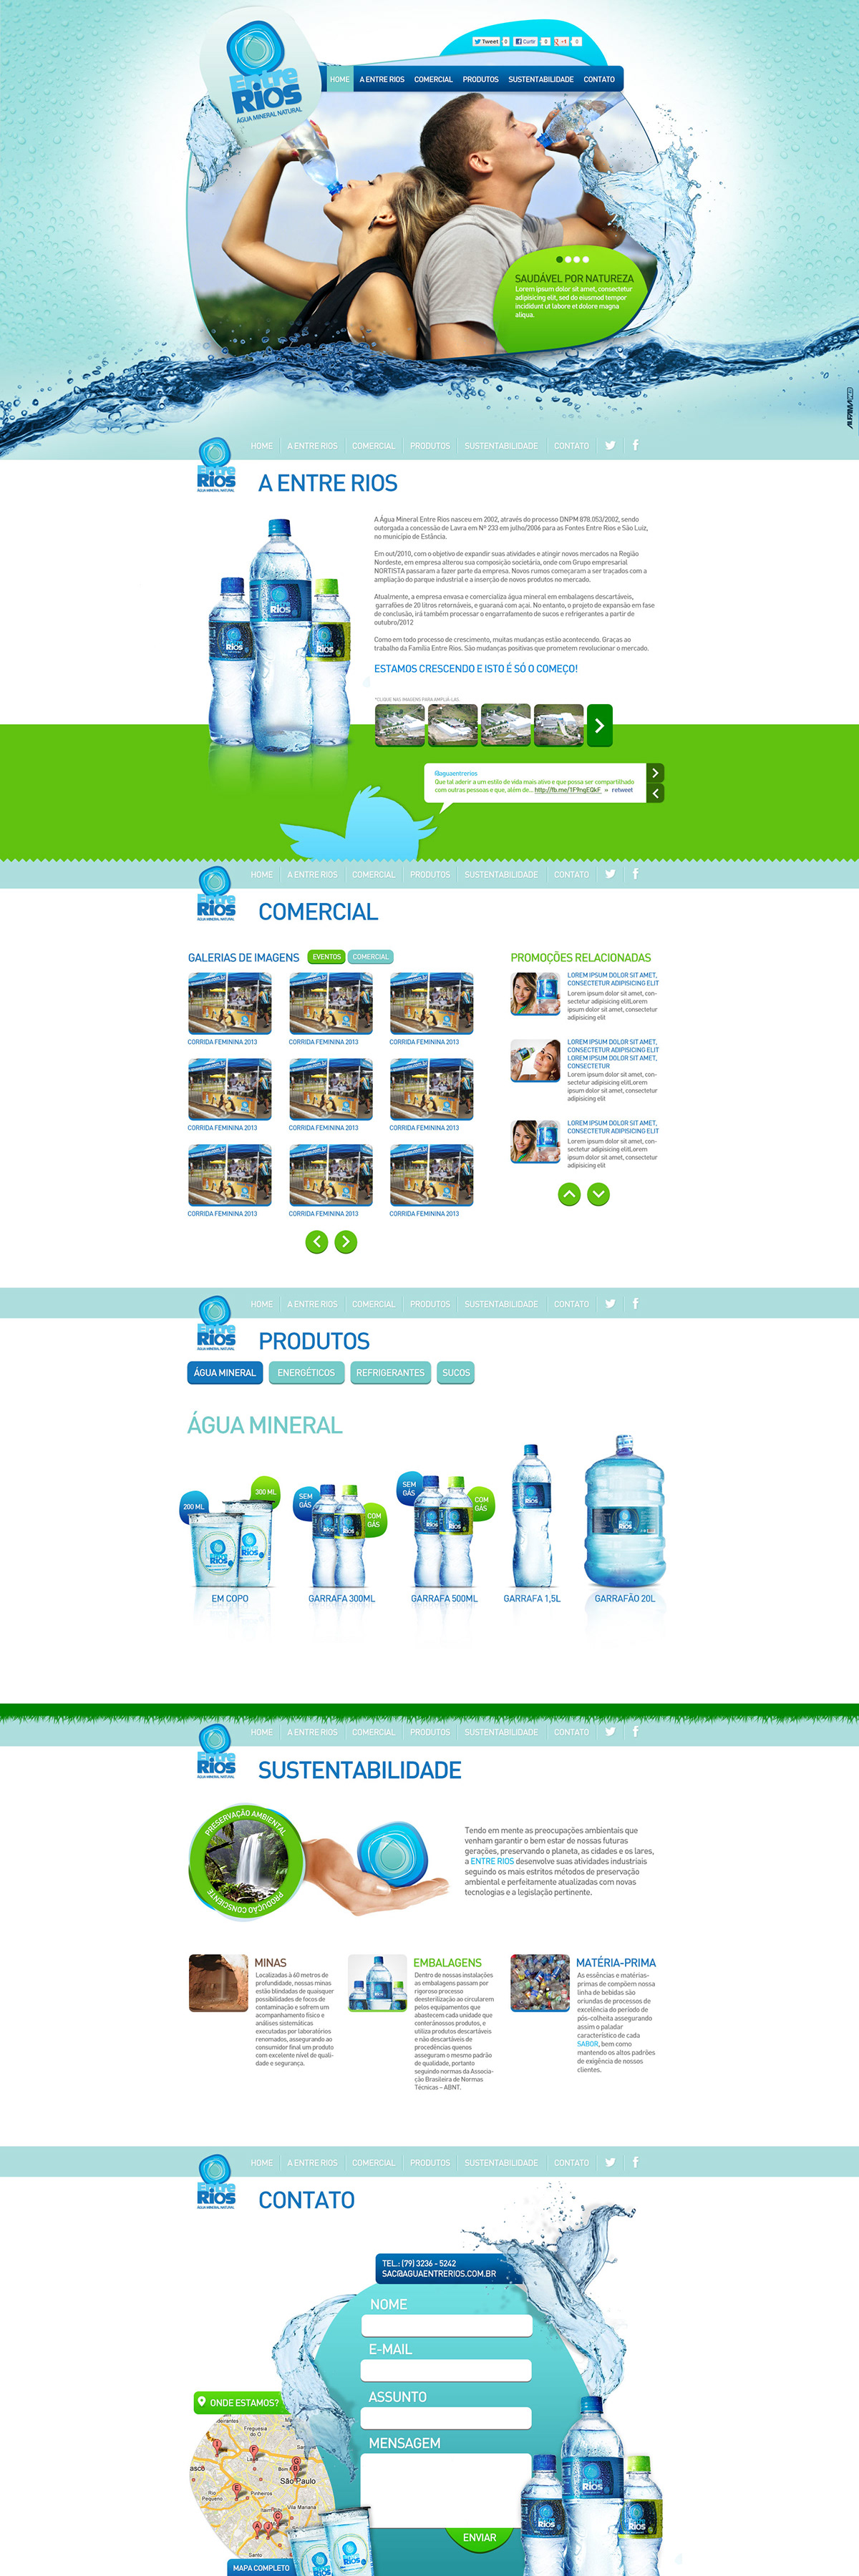 Agua Mineral Layout Layout de Produto One Page